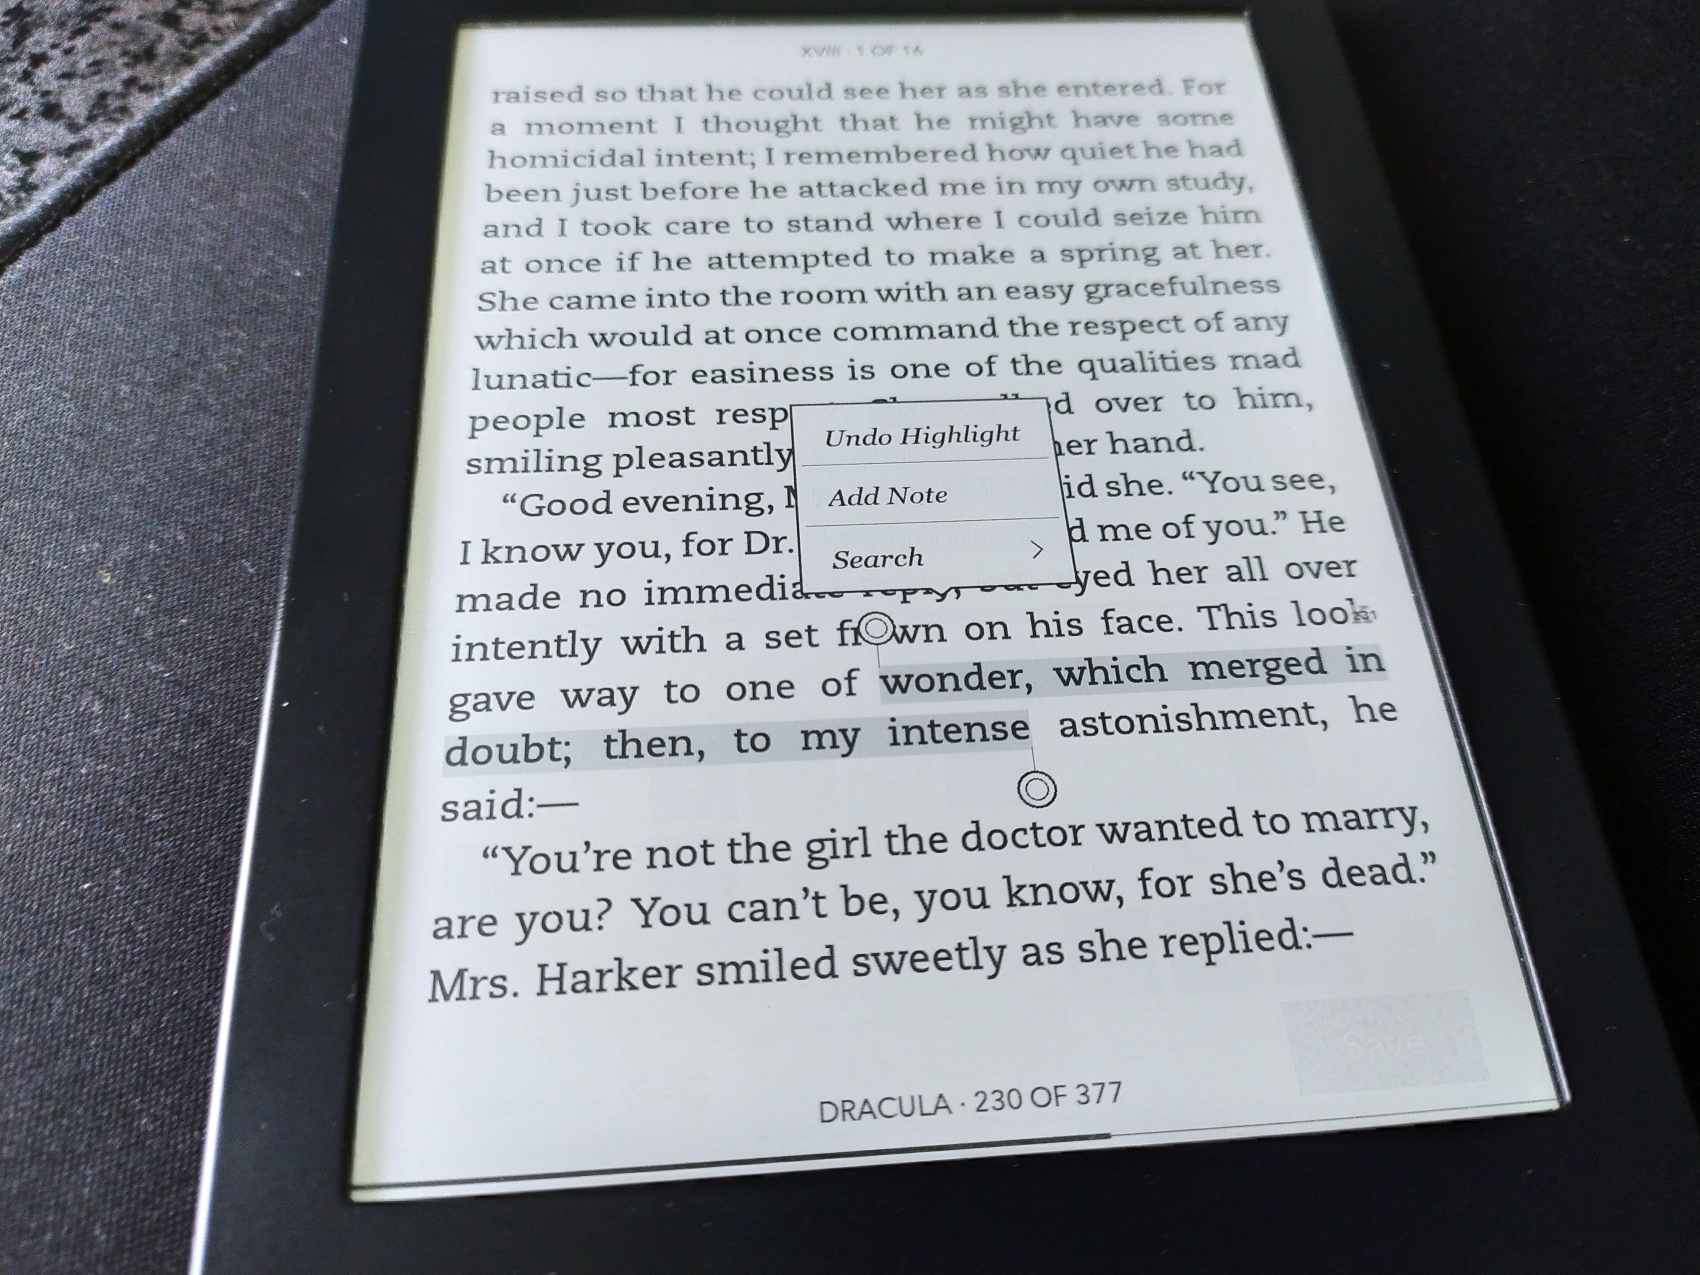 How to export Kobo highlights and annotation from your e-reader?